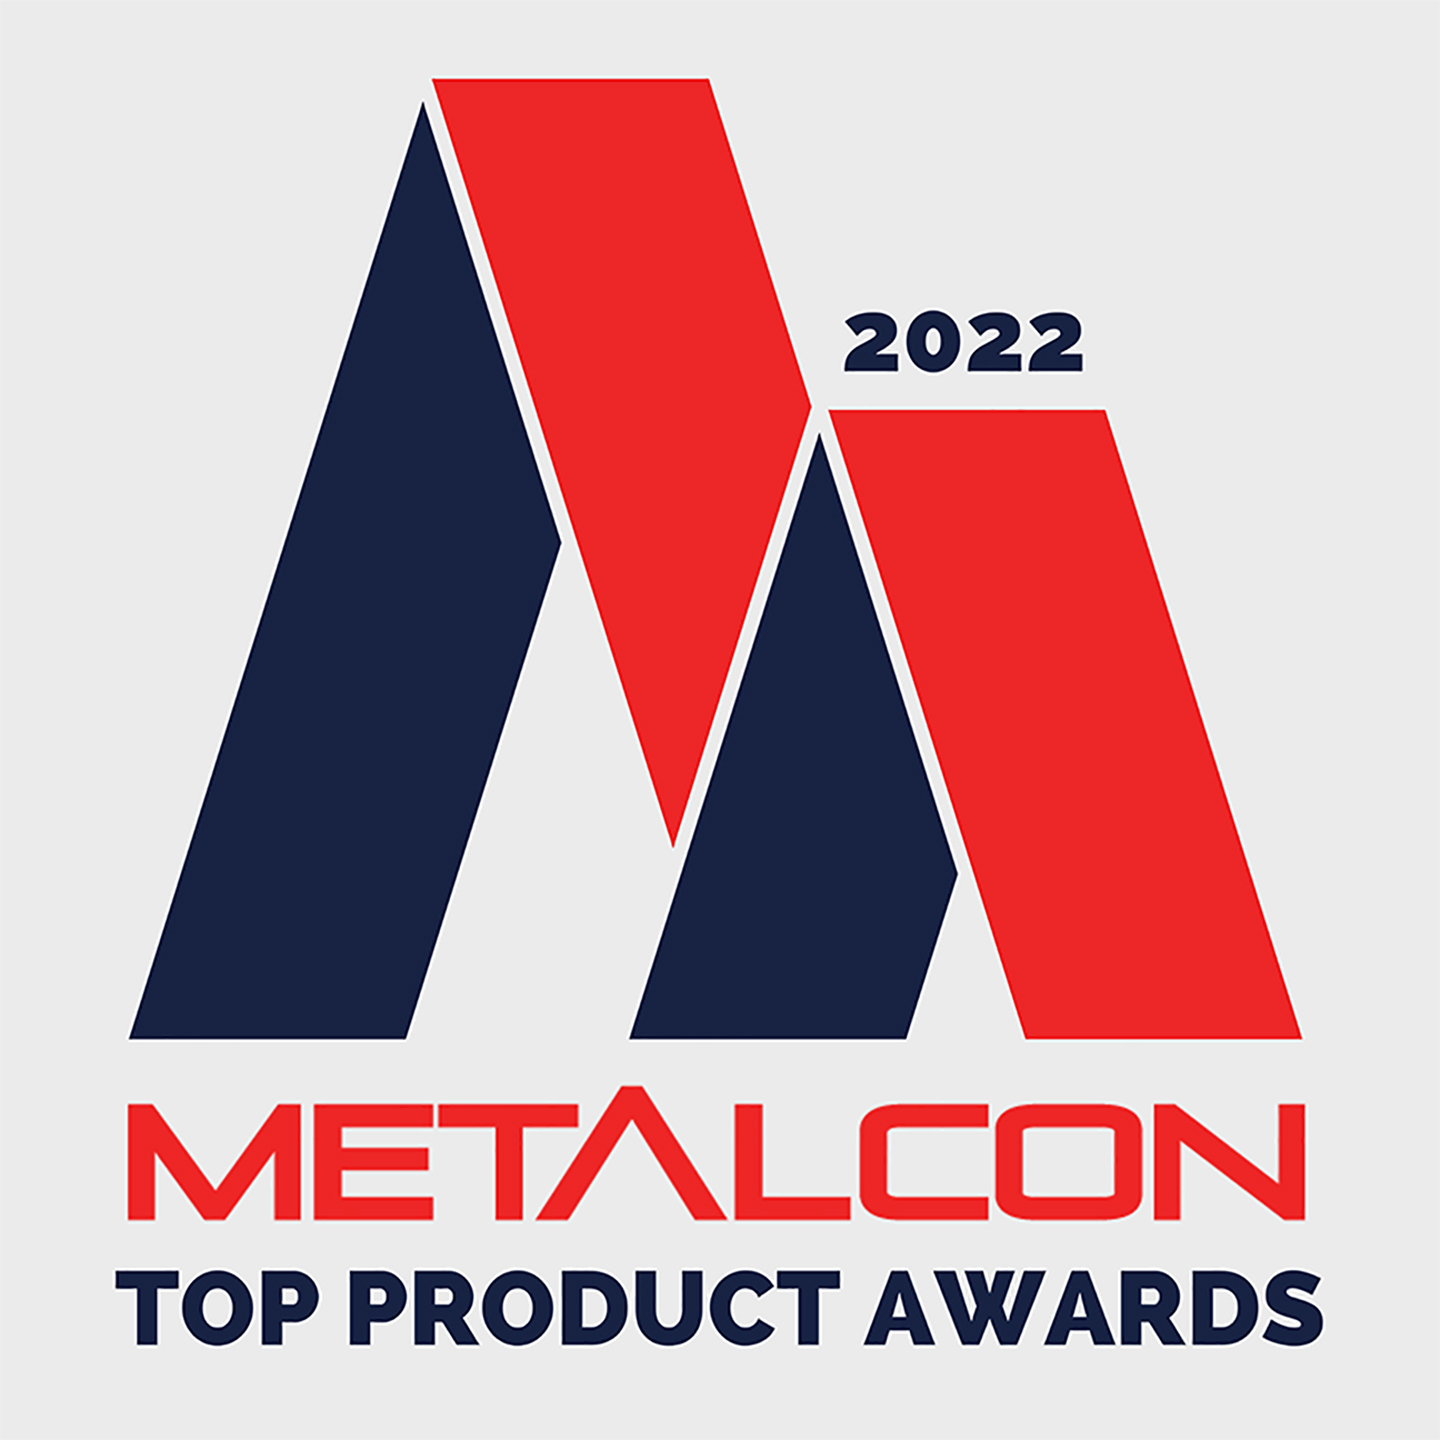 METALCON Announces Top Products Award Winners